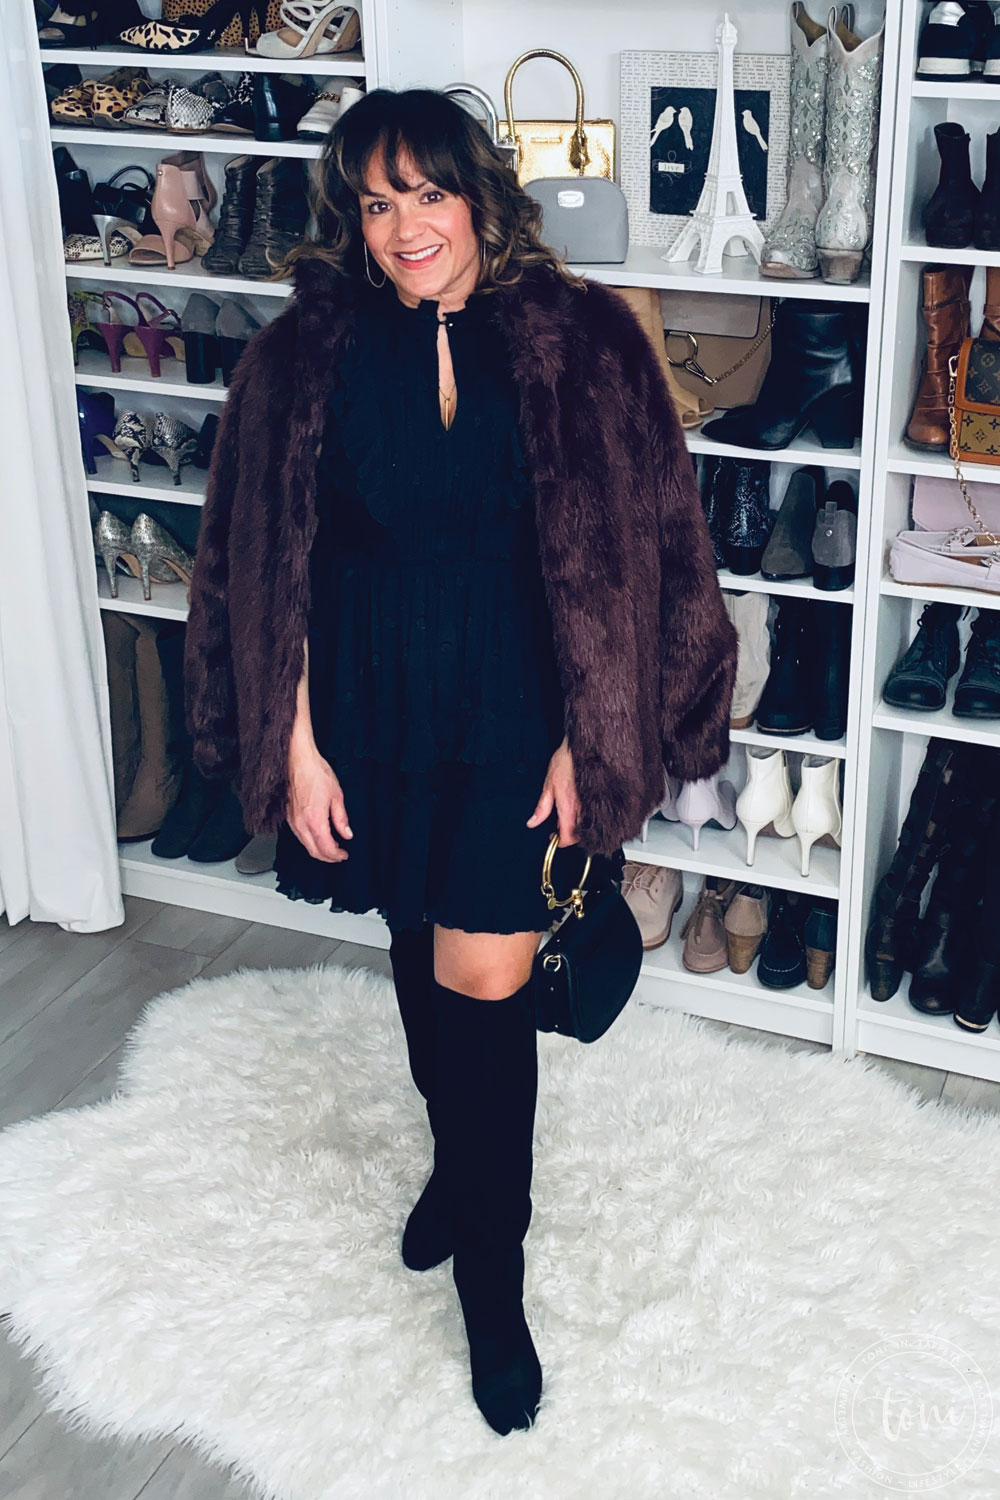 Kate Spade Ruffled Dress and Knee High Booties with Fur Jacket